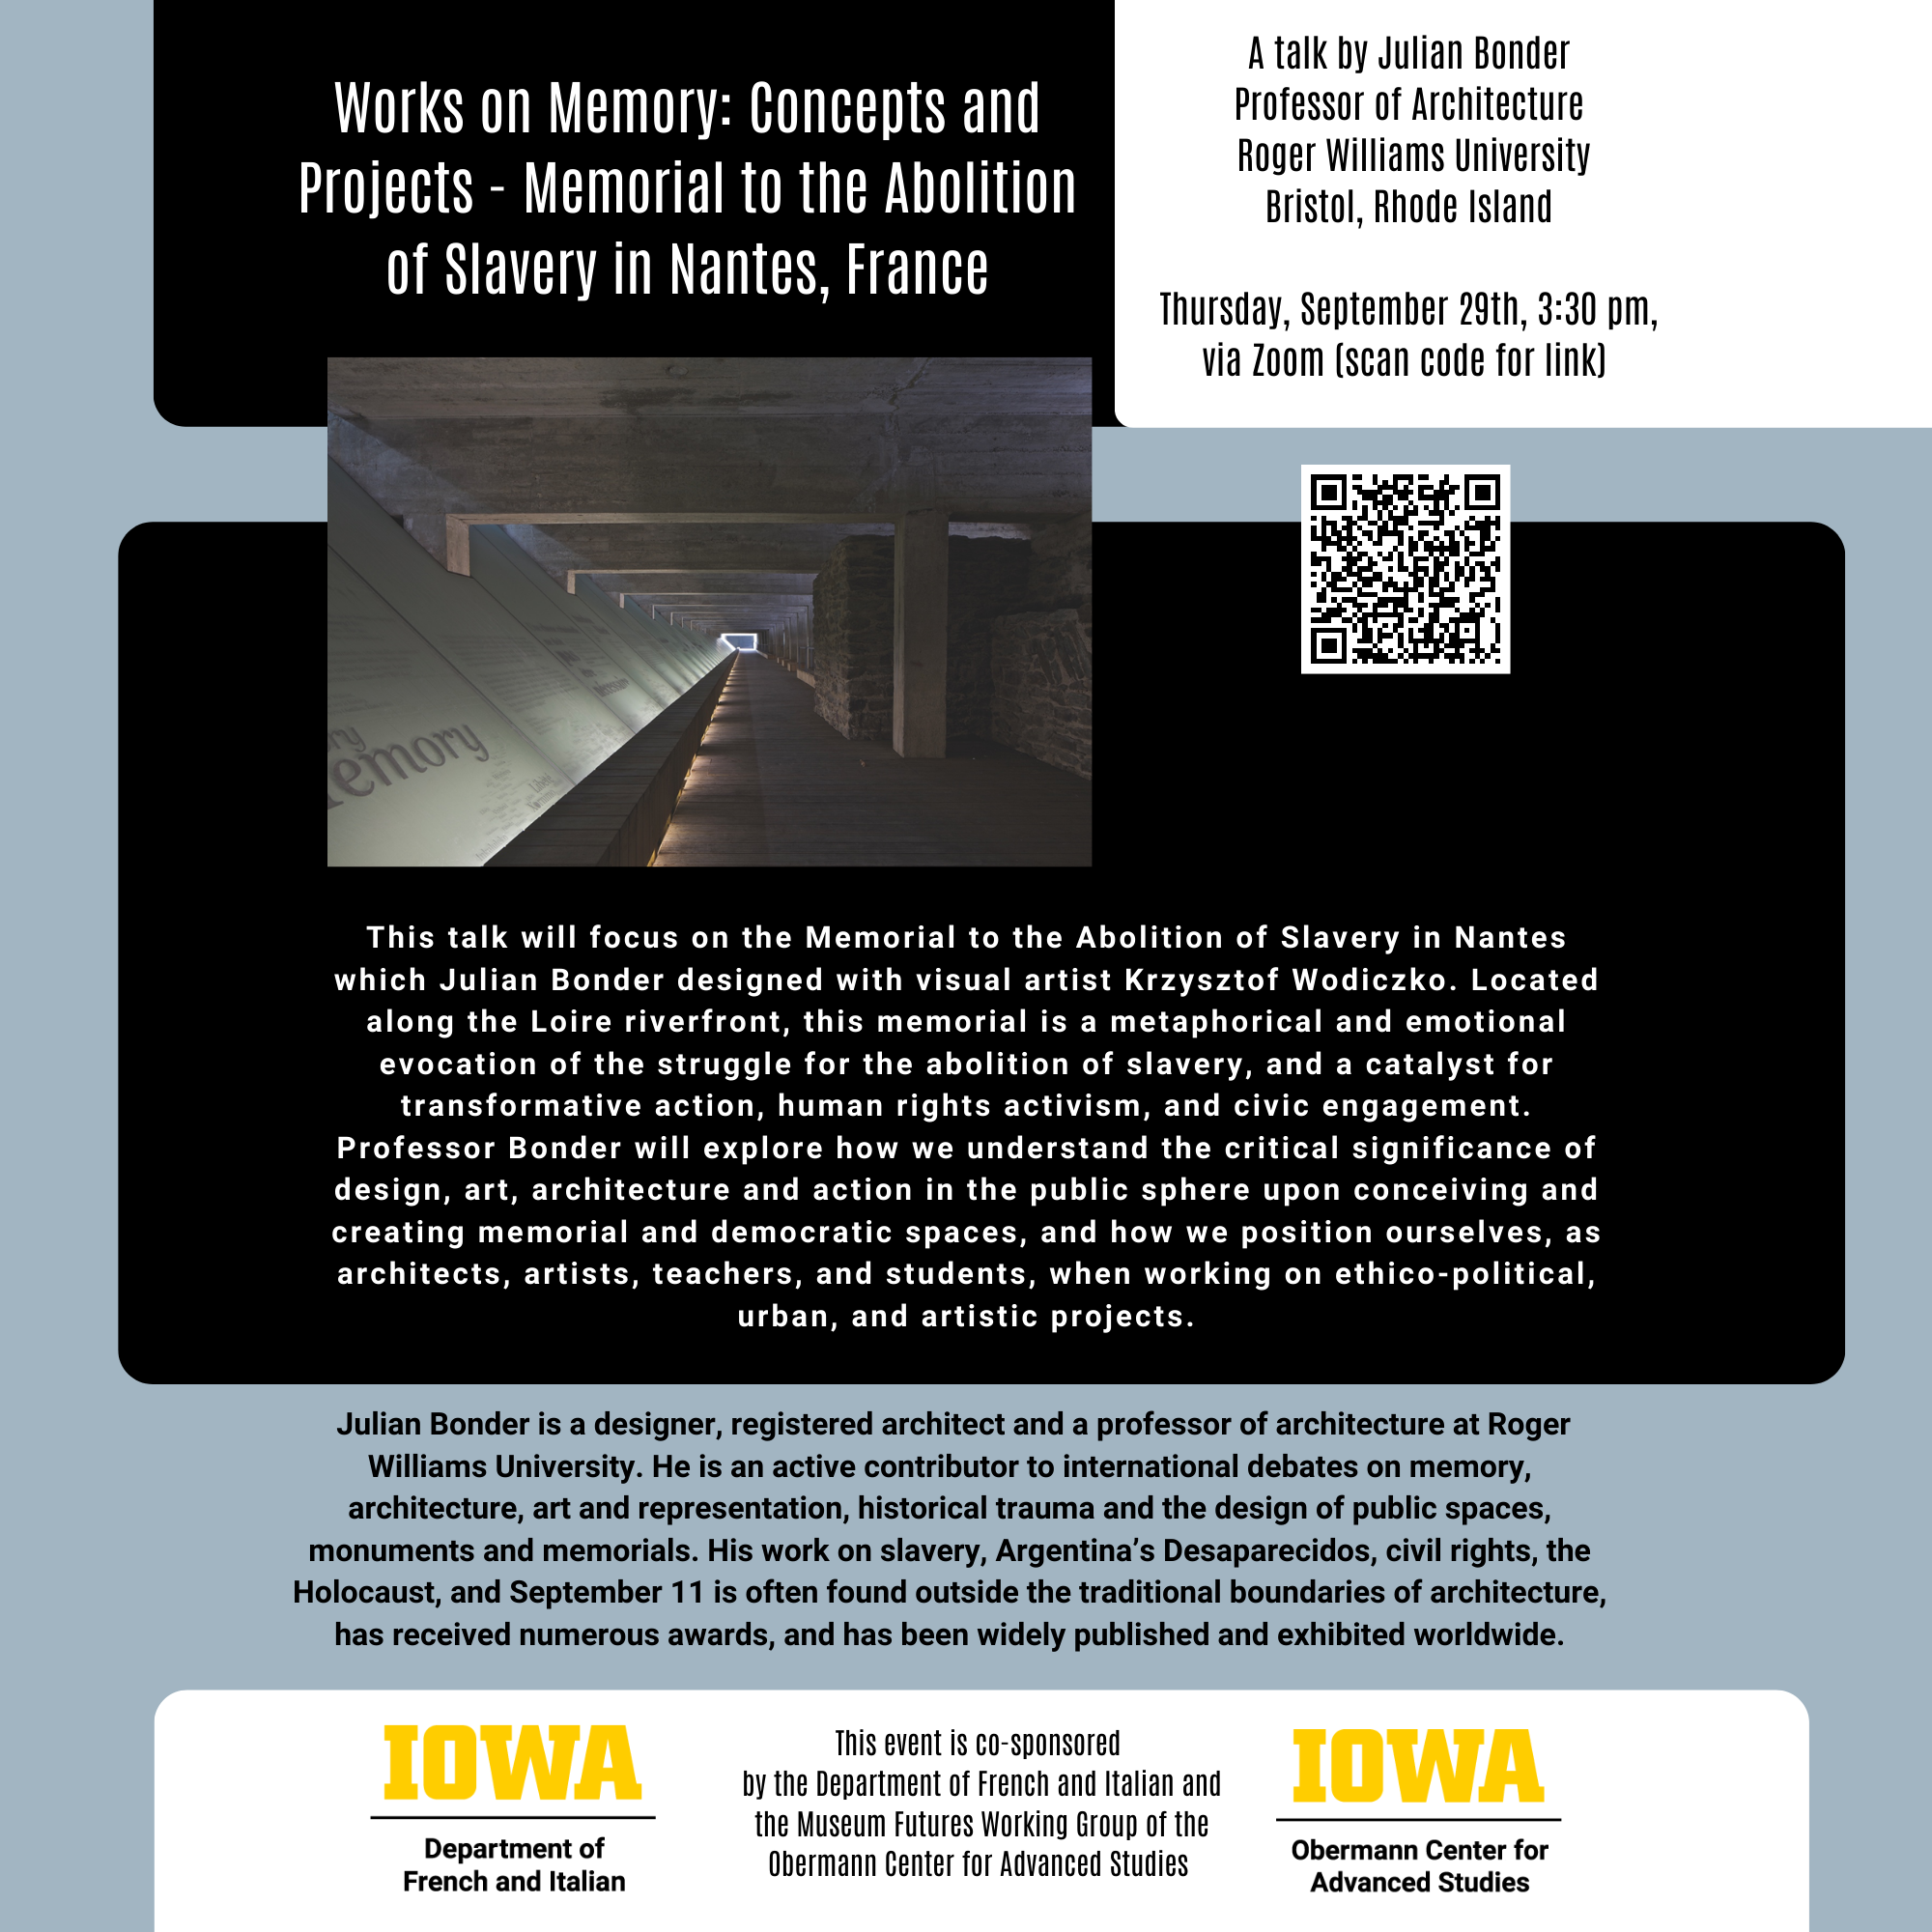 Flyer for event entitled Works on Memory: Concepts and Projects - Memorial to the Abolition of Slavery in Nantes, France